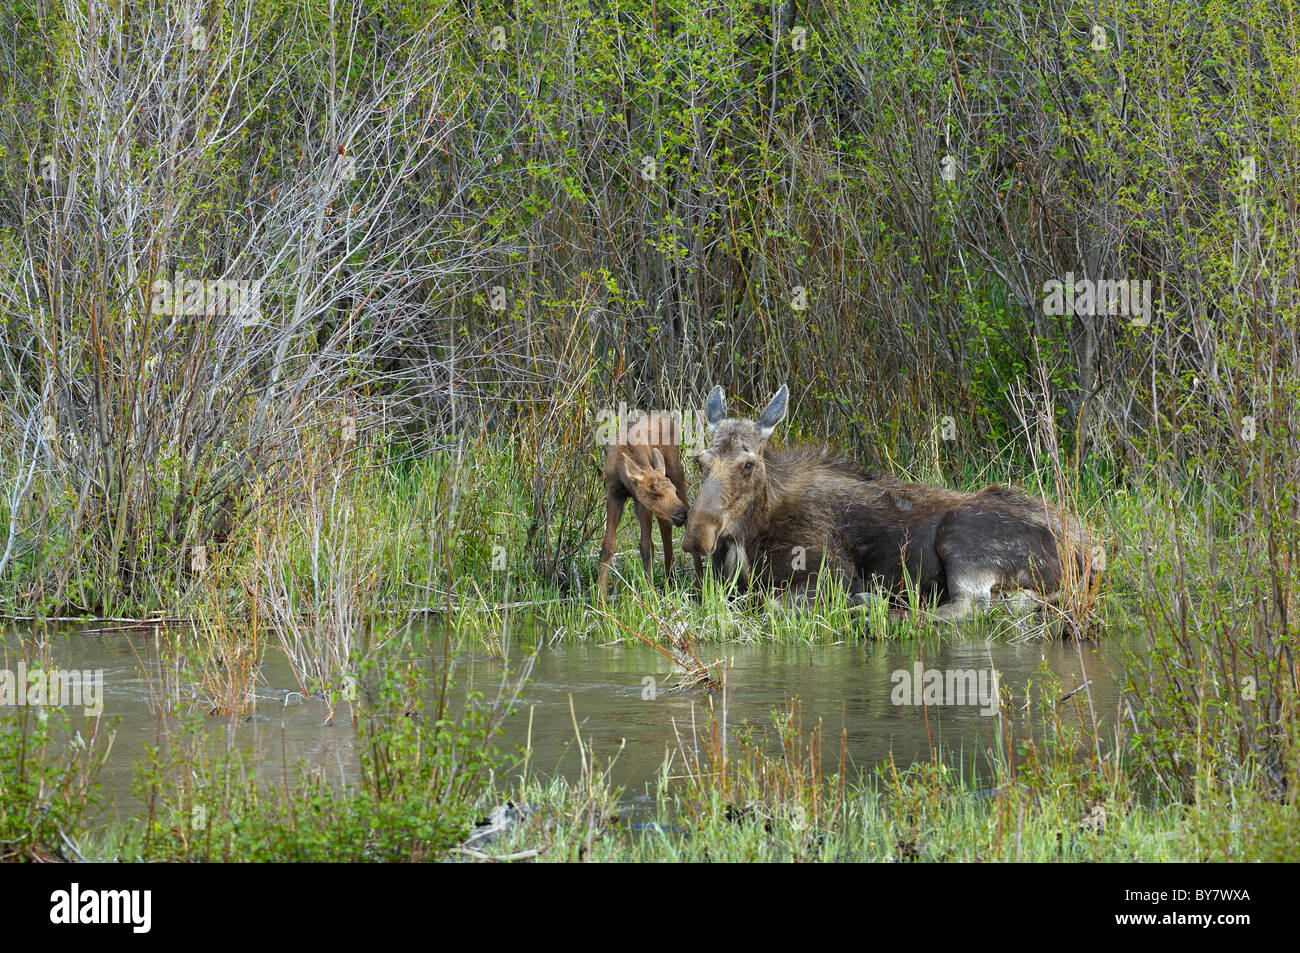 Mother Moose resting with her newborn calf. Stock Photo